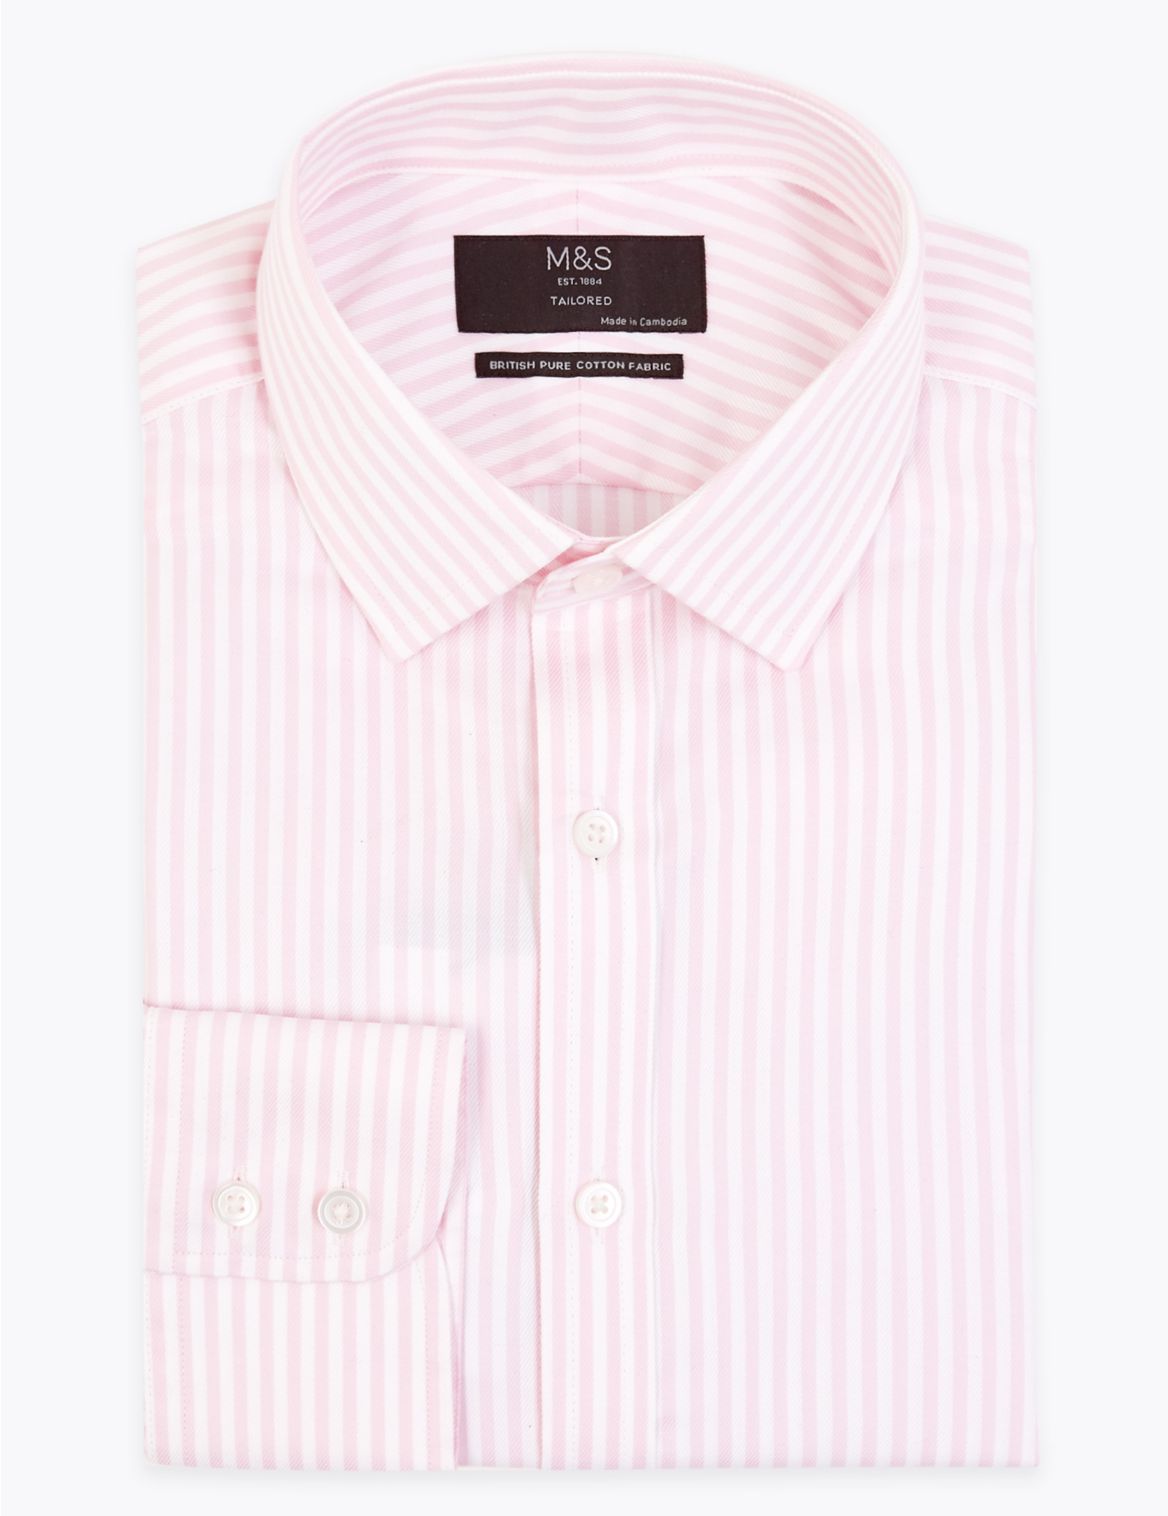 Tailored Fit English Fine Cotton Striped Shirt pink